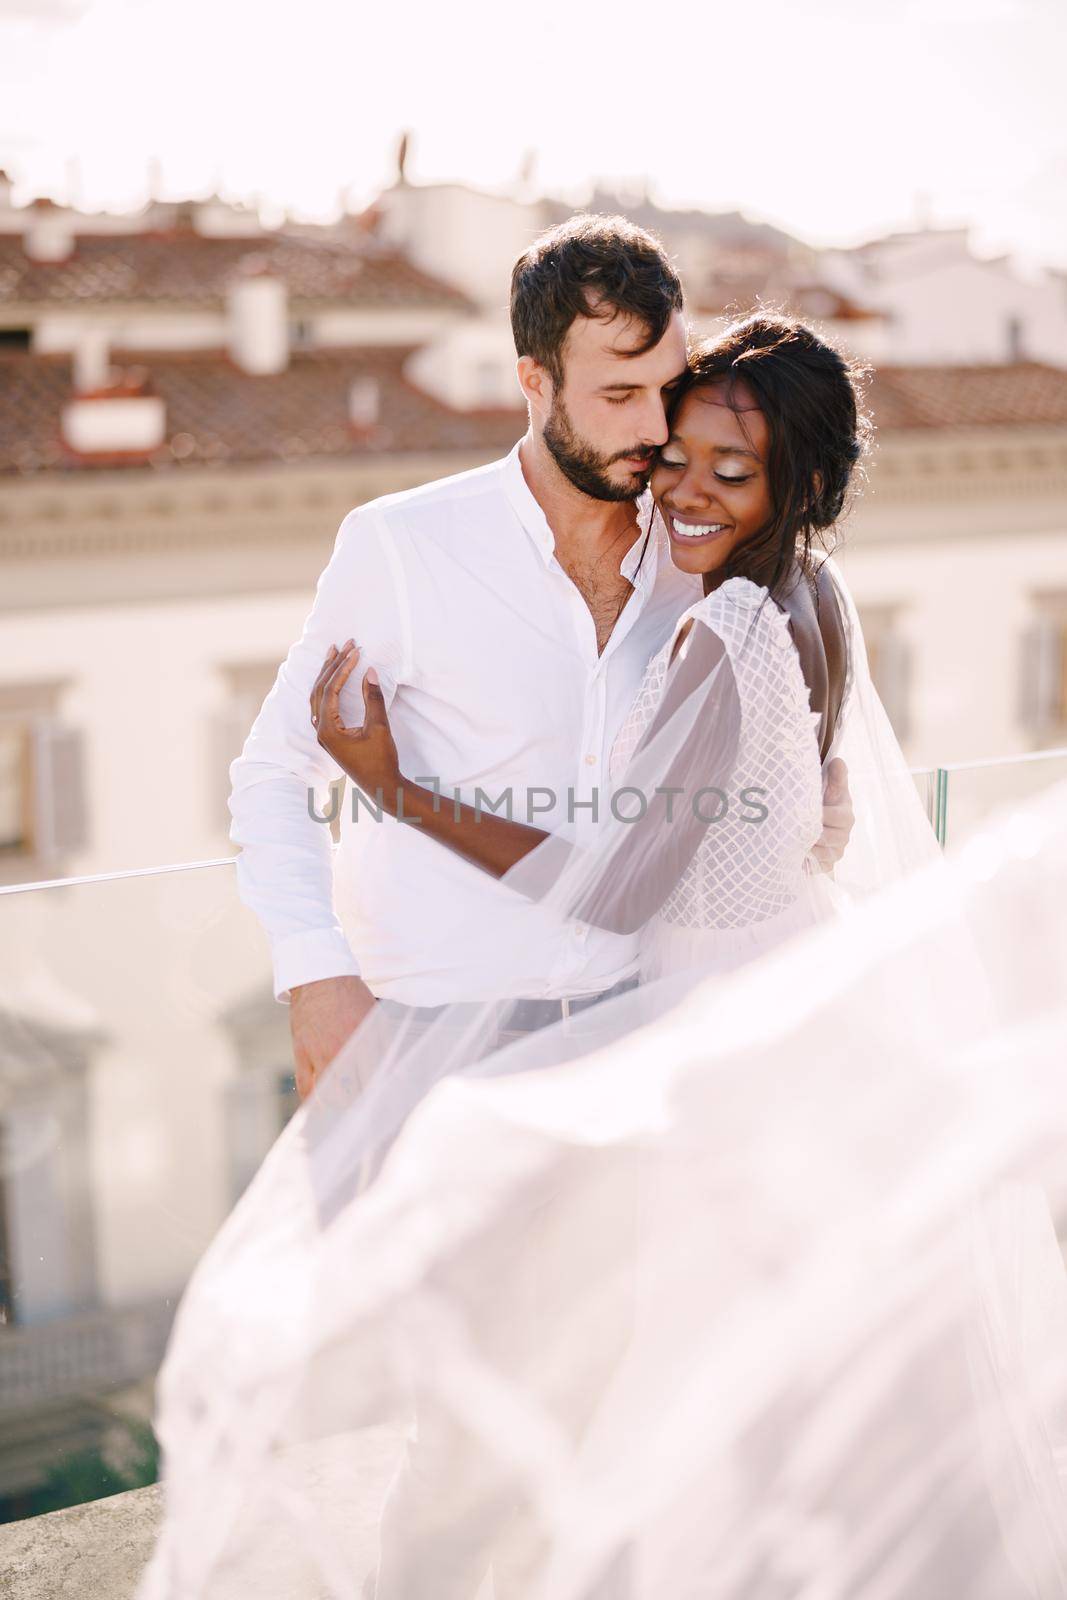 Destination fine-art wedding in Florence, Italy. Multiethnic wedding couple. African-American bride hugs Caucasian groom on the roof with cityscape view. by Nadtochiy